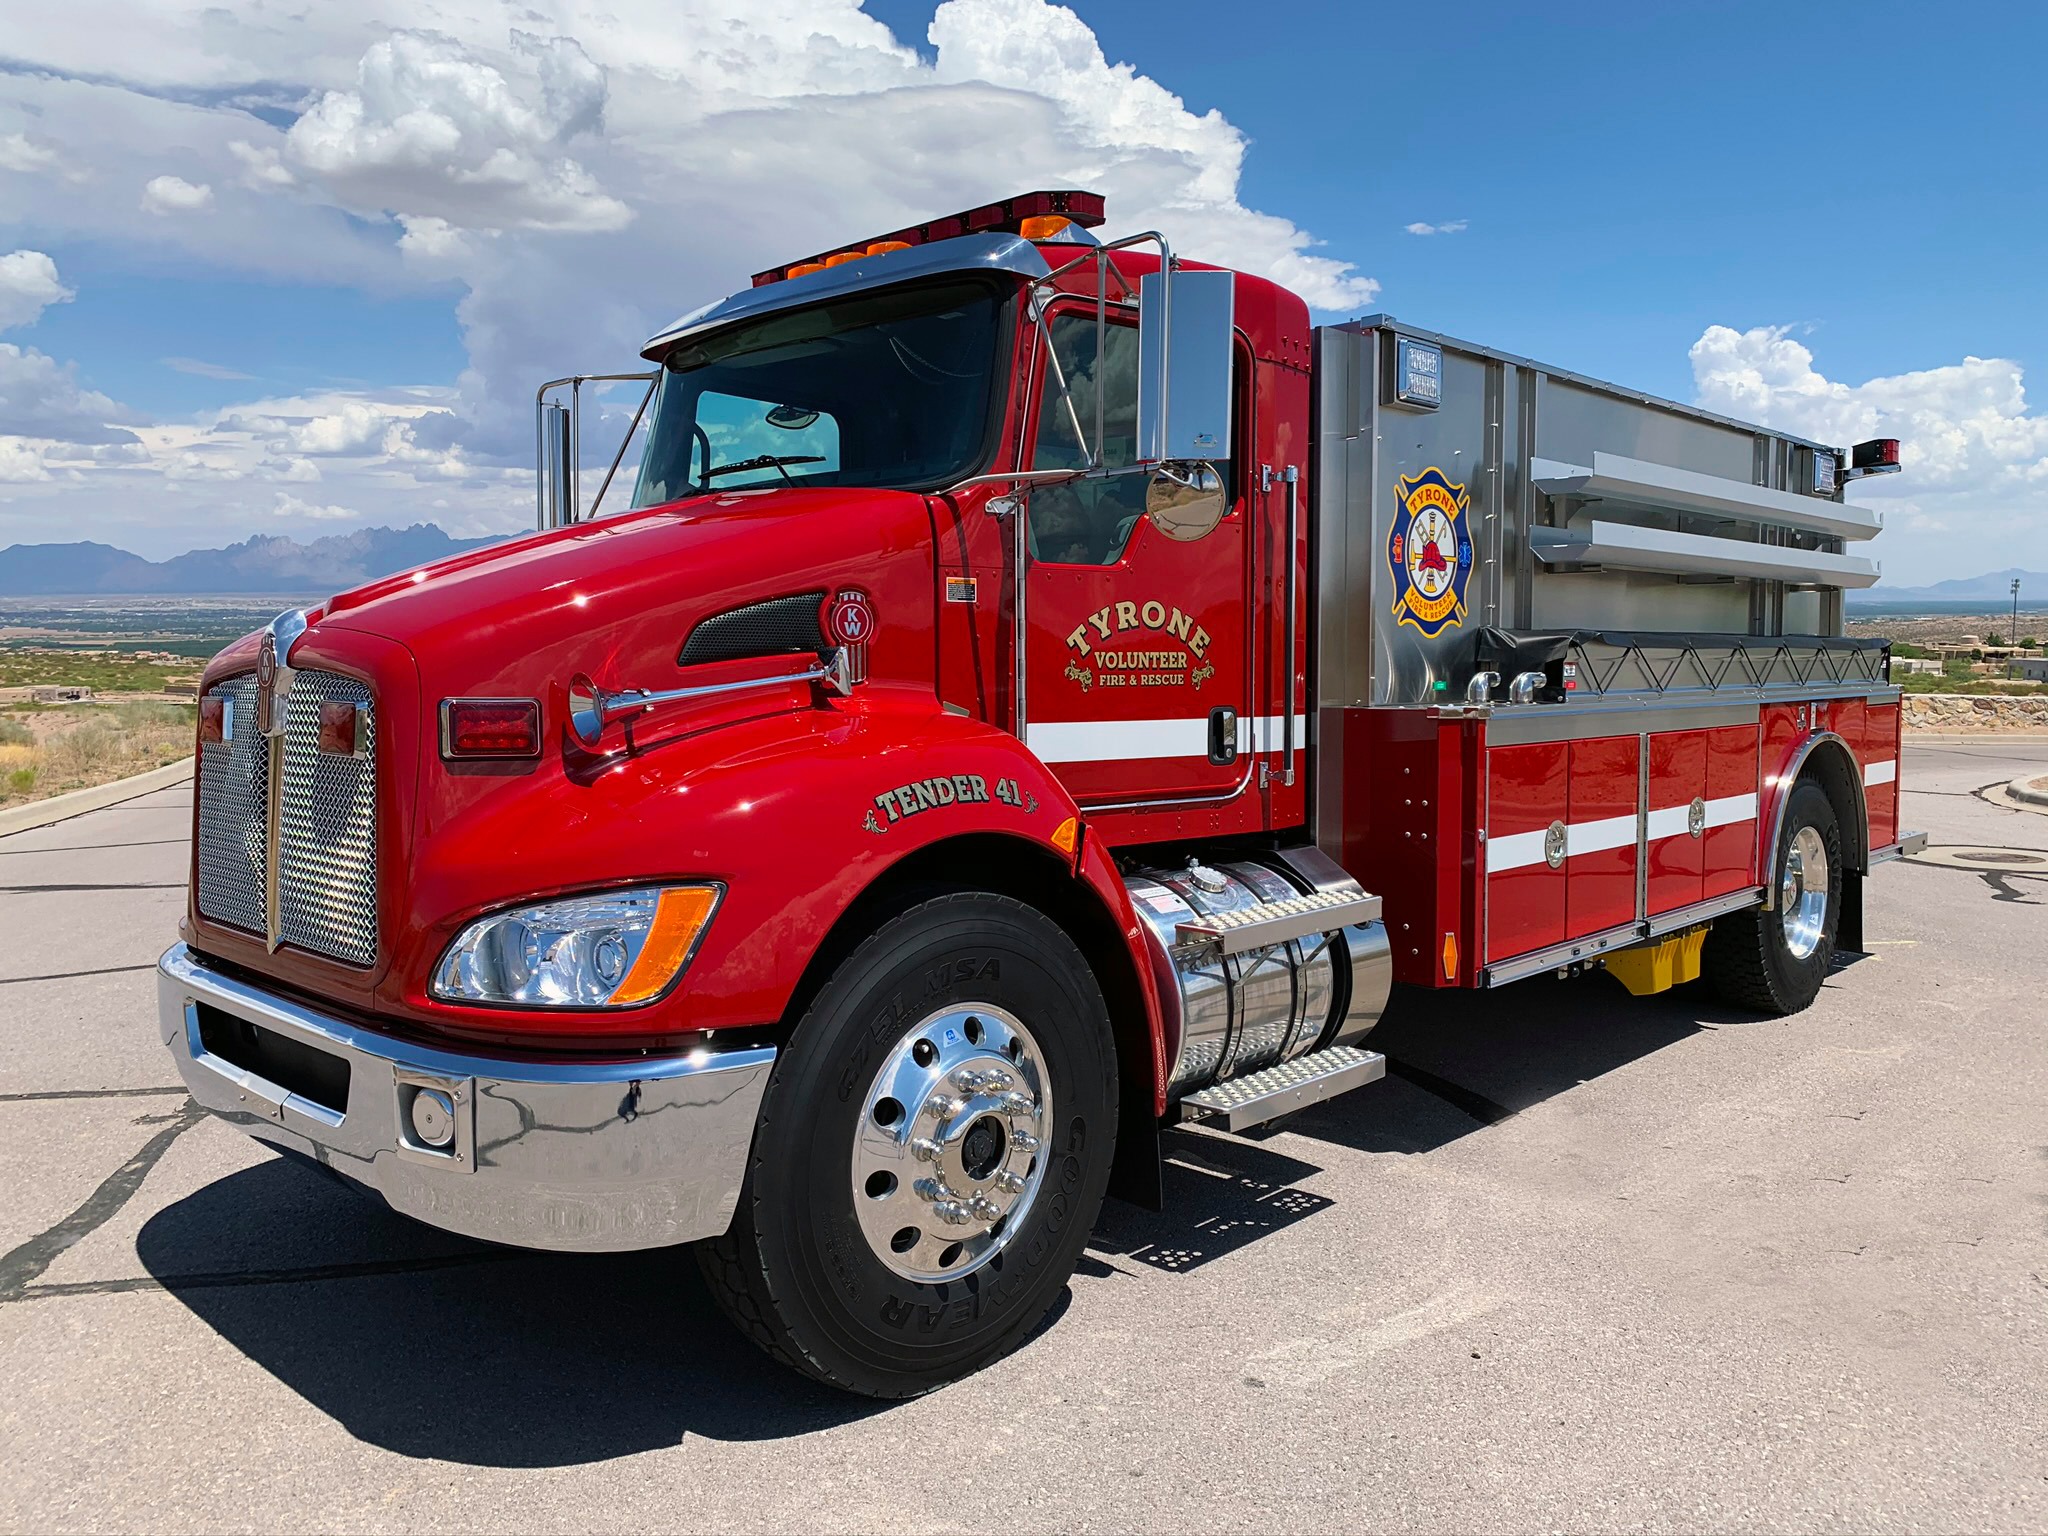 Grant County / Tyrone Fire Department, NM – #23366